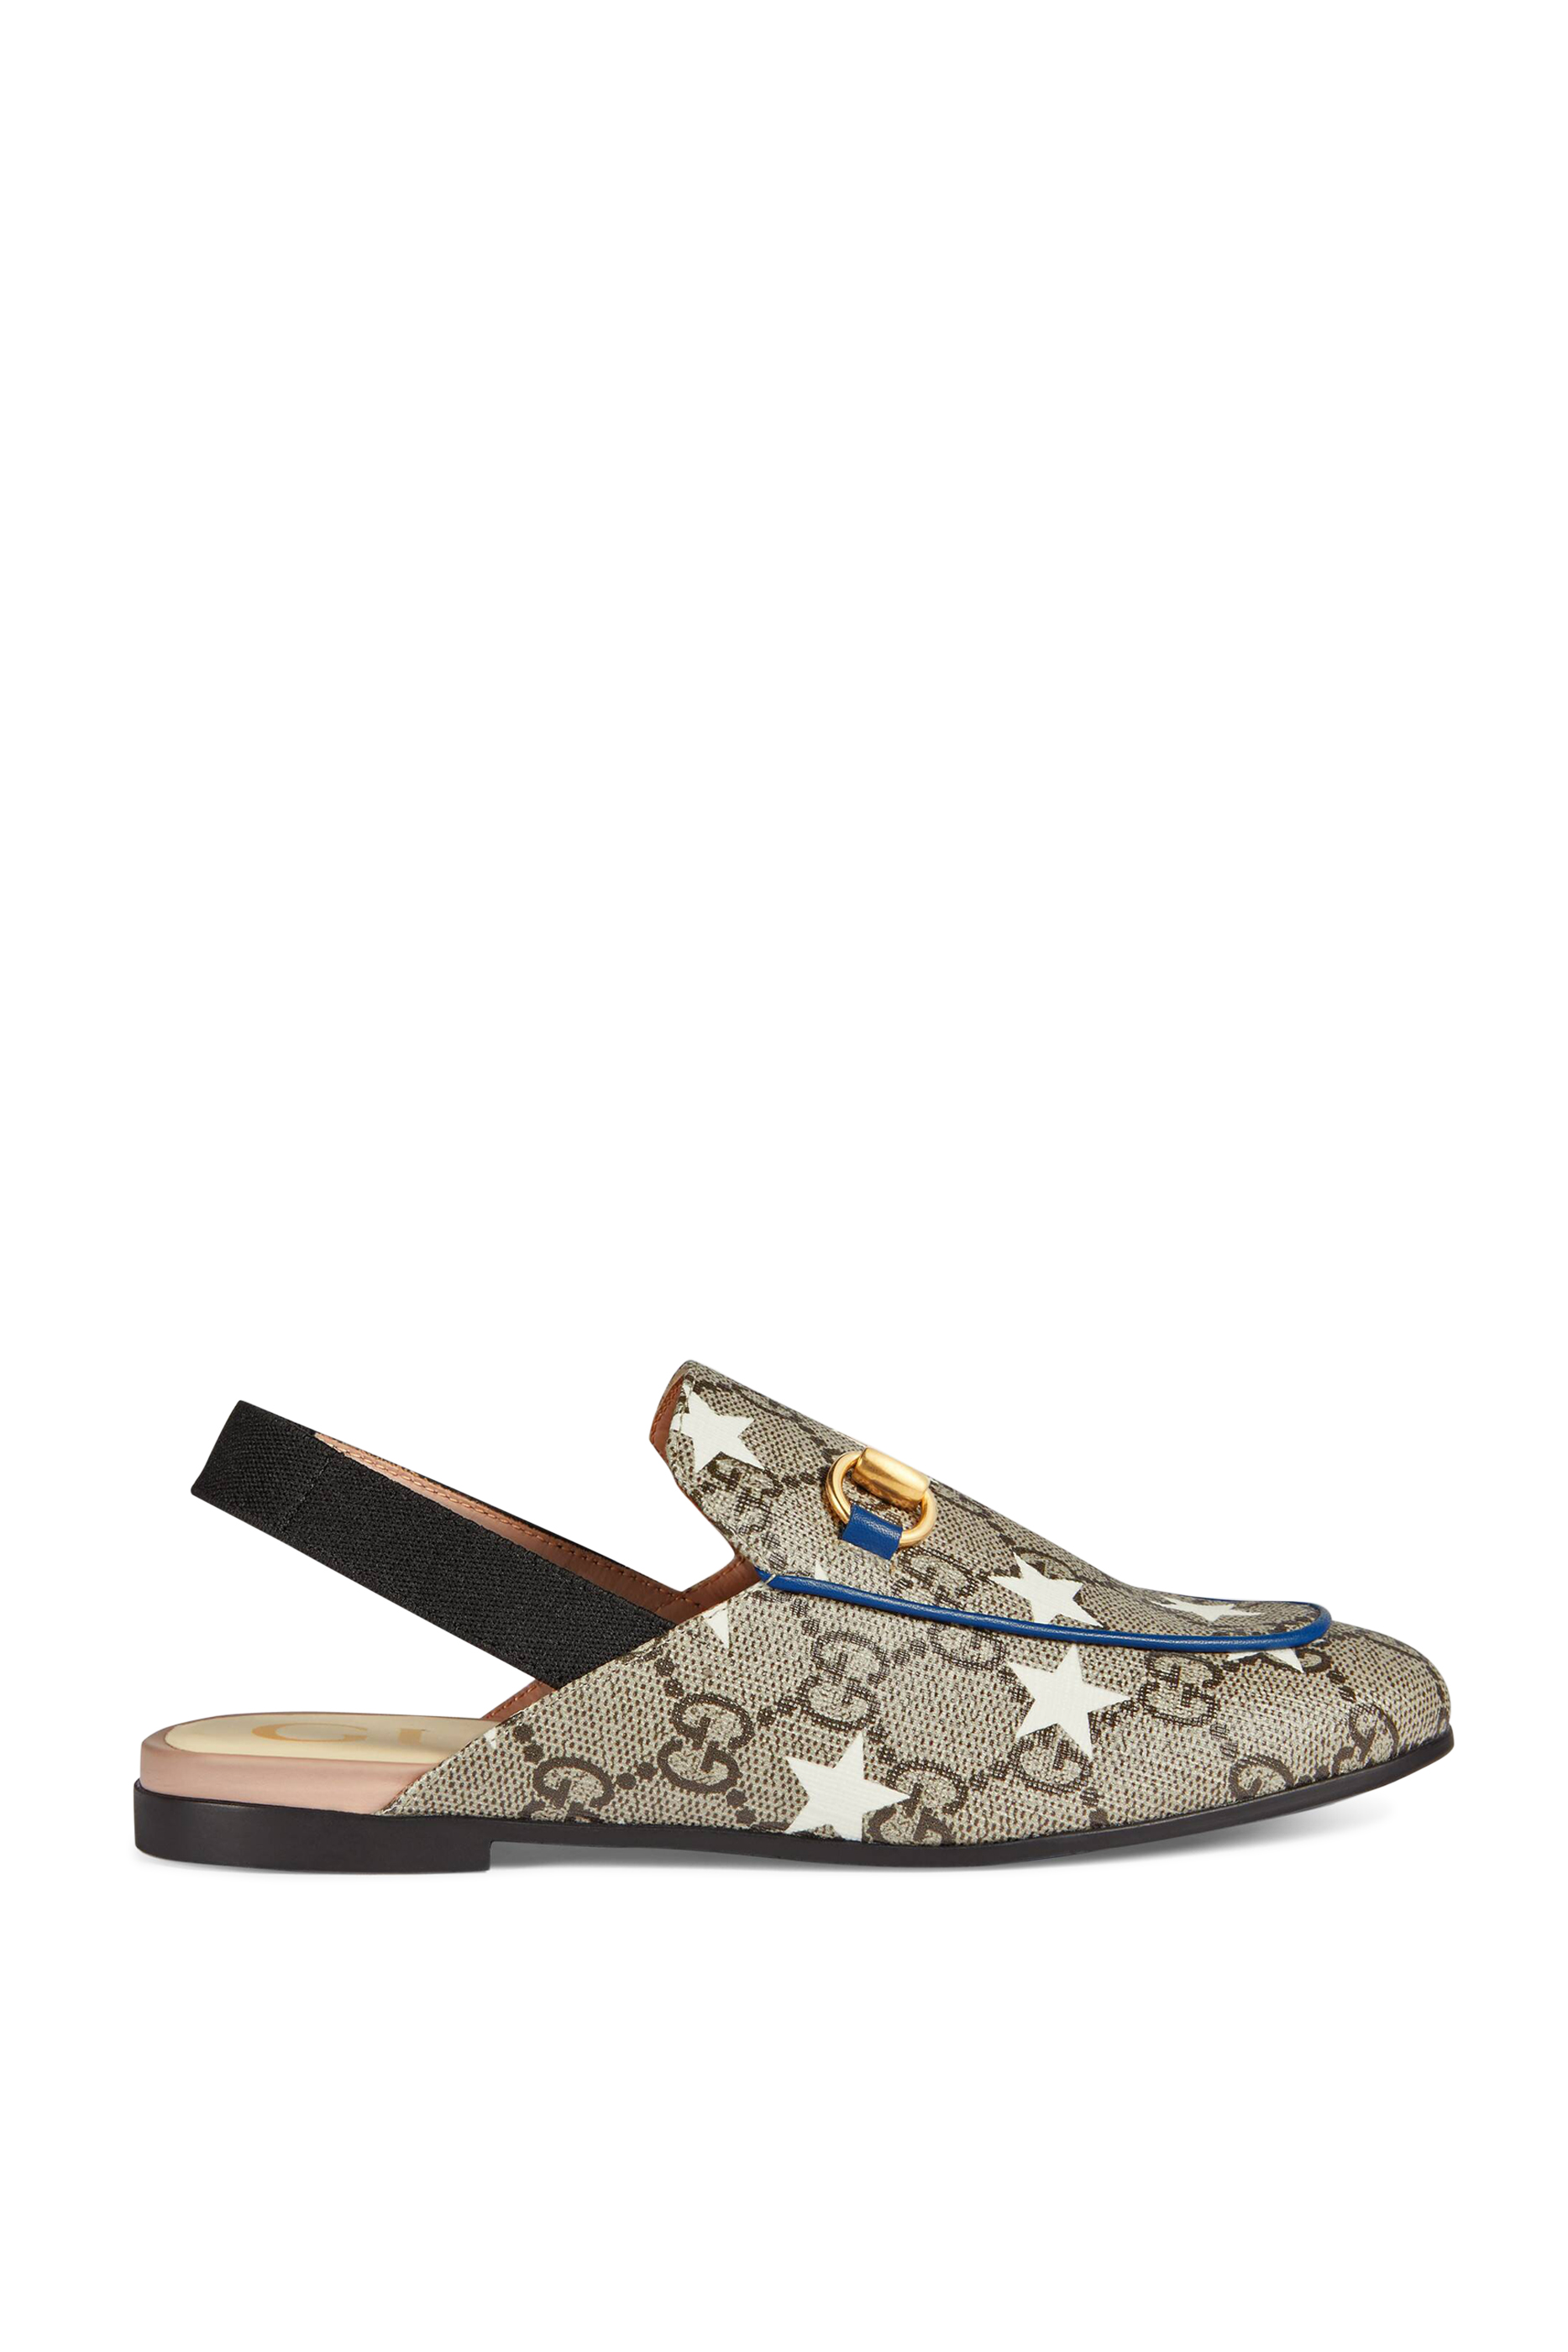 Buy Gucci Kids Princetown Canvas Slip-Ons for | Bloomingdale's Kuwait